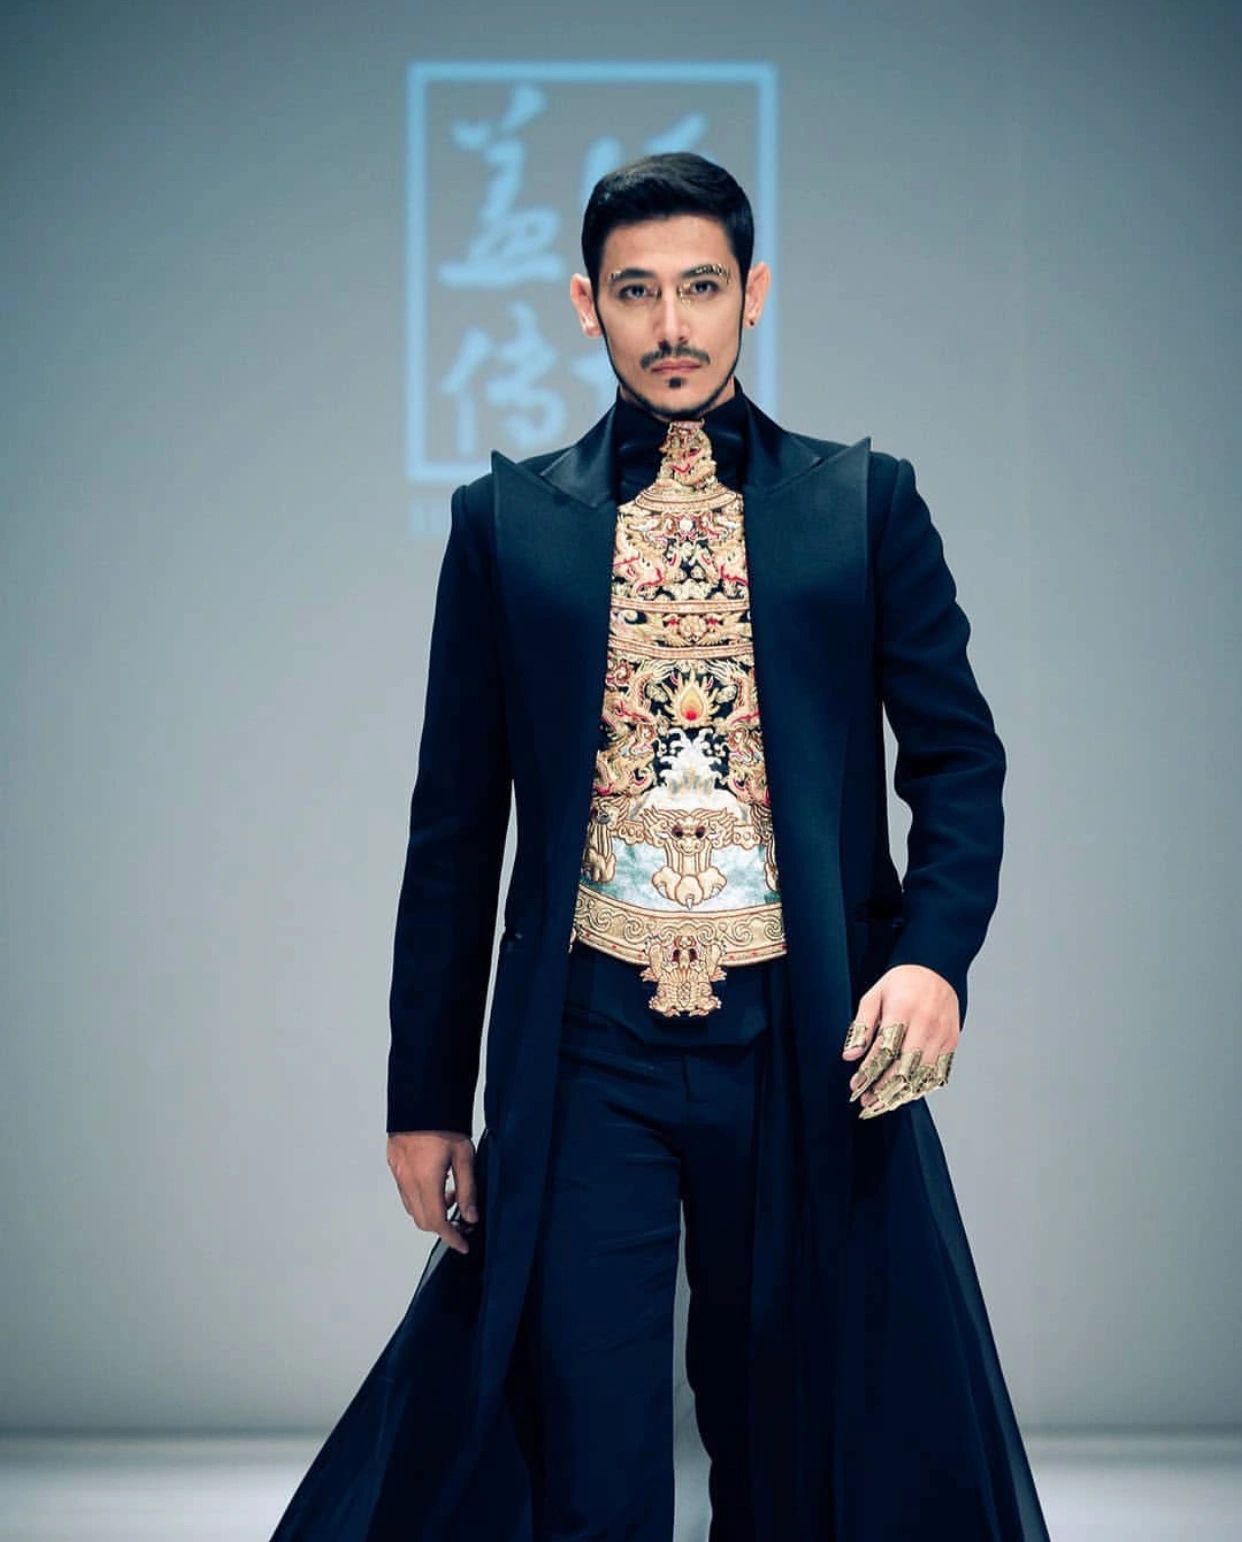 Walid Riachy in DFD Fashion Show walking for the Chinese designer Heaven Gaia